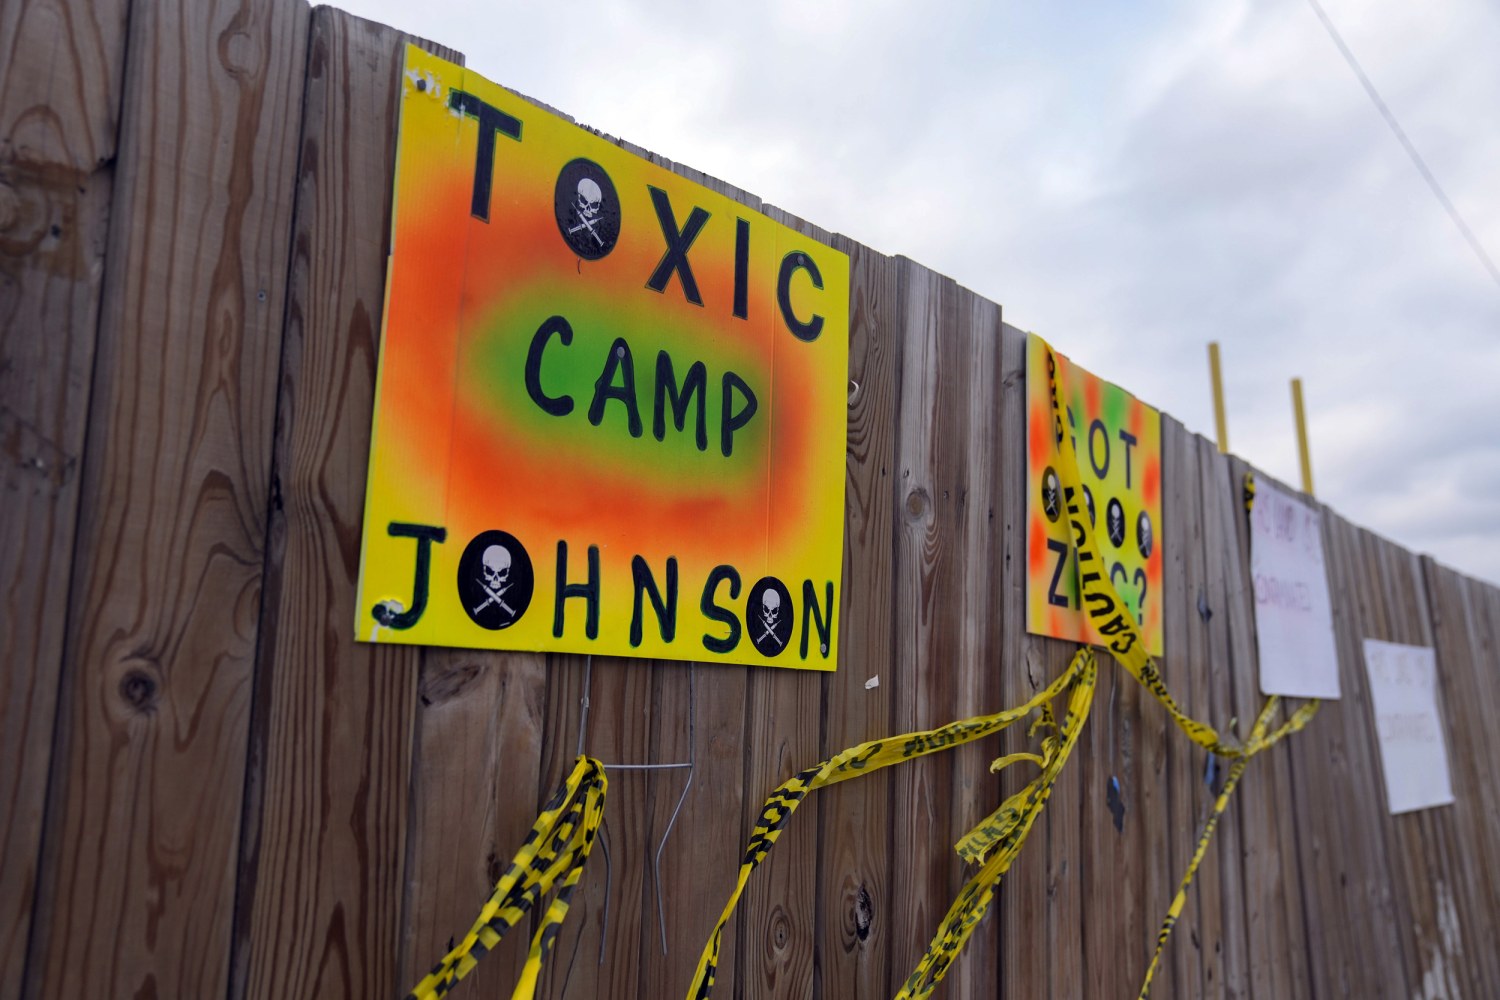 Chicago reels from fallout of toxic metals at proposed migrant shelter camp